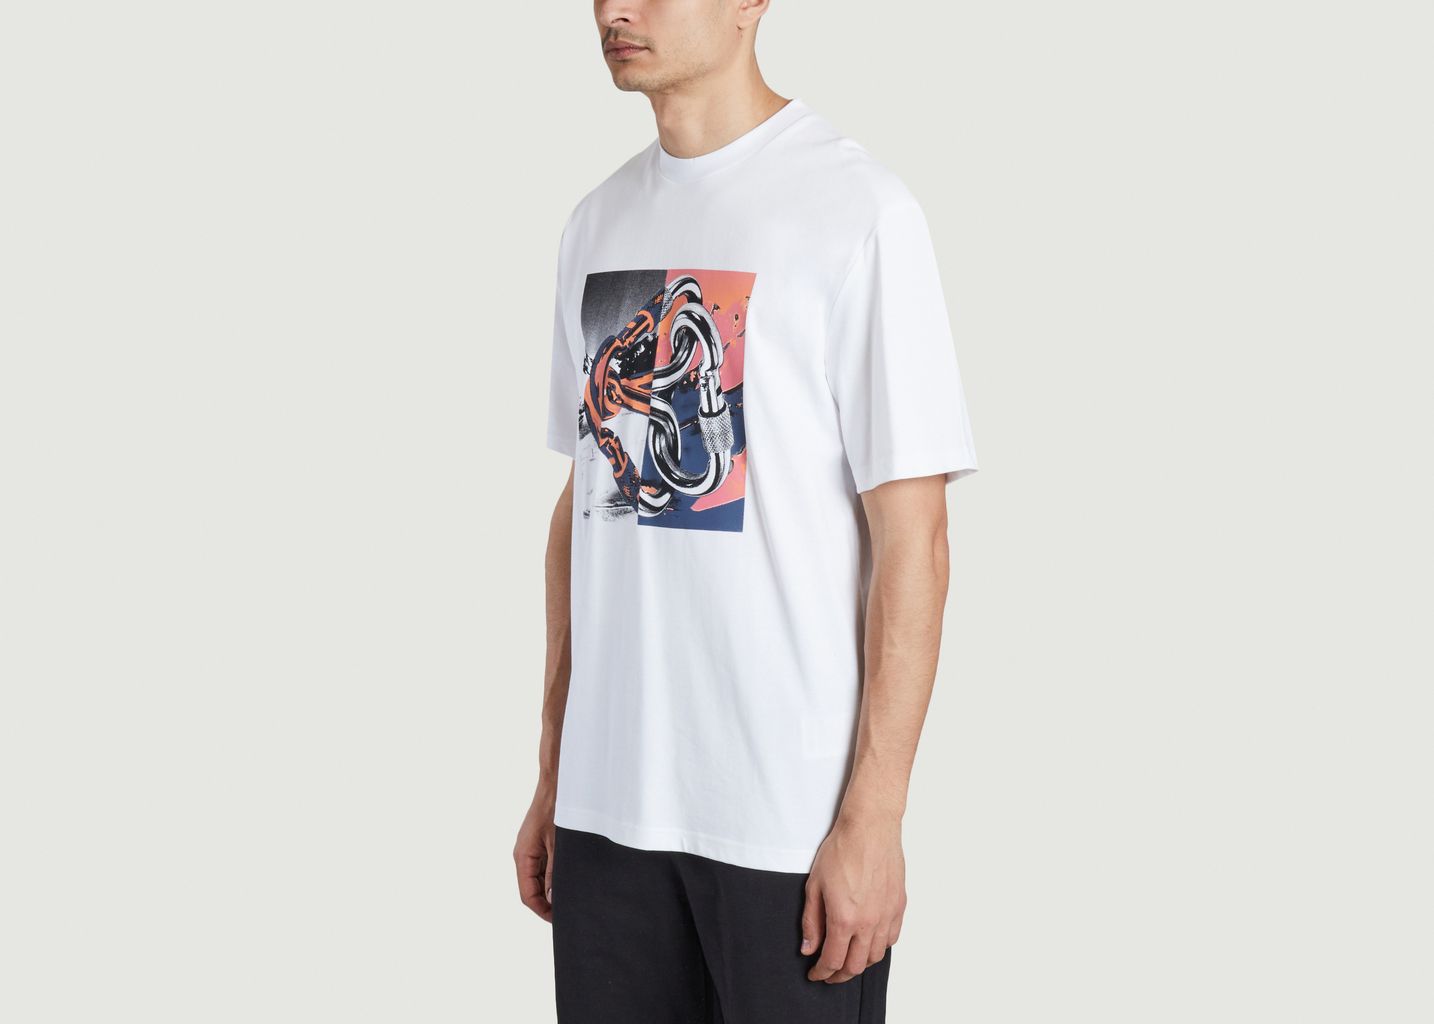 T-shirt Graphic  - The North Face